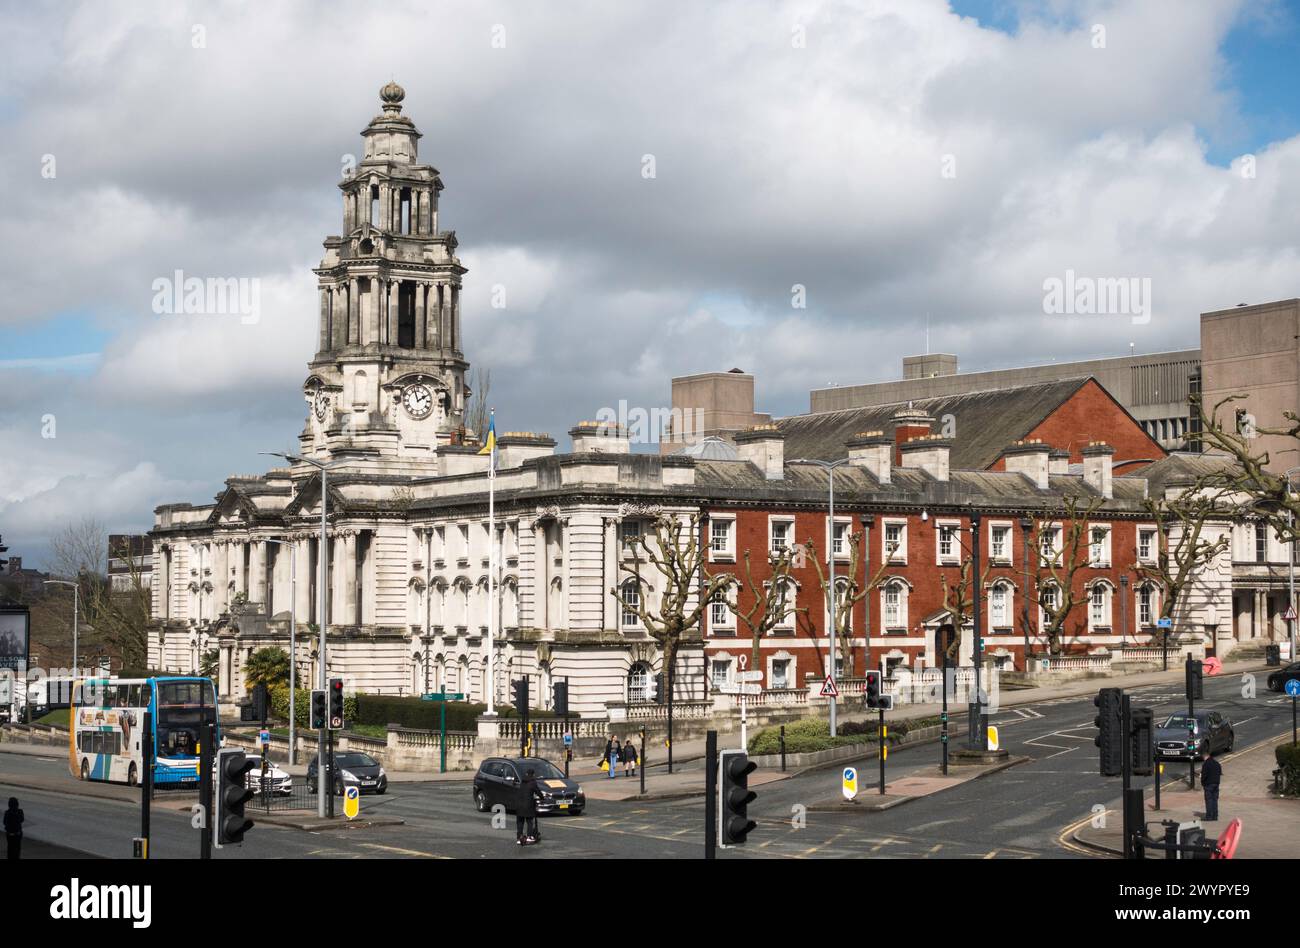 The listed Stockport Town Hall, England, UK Stock Photo